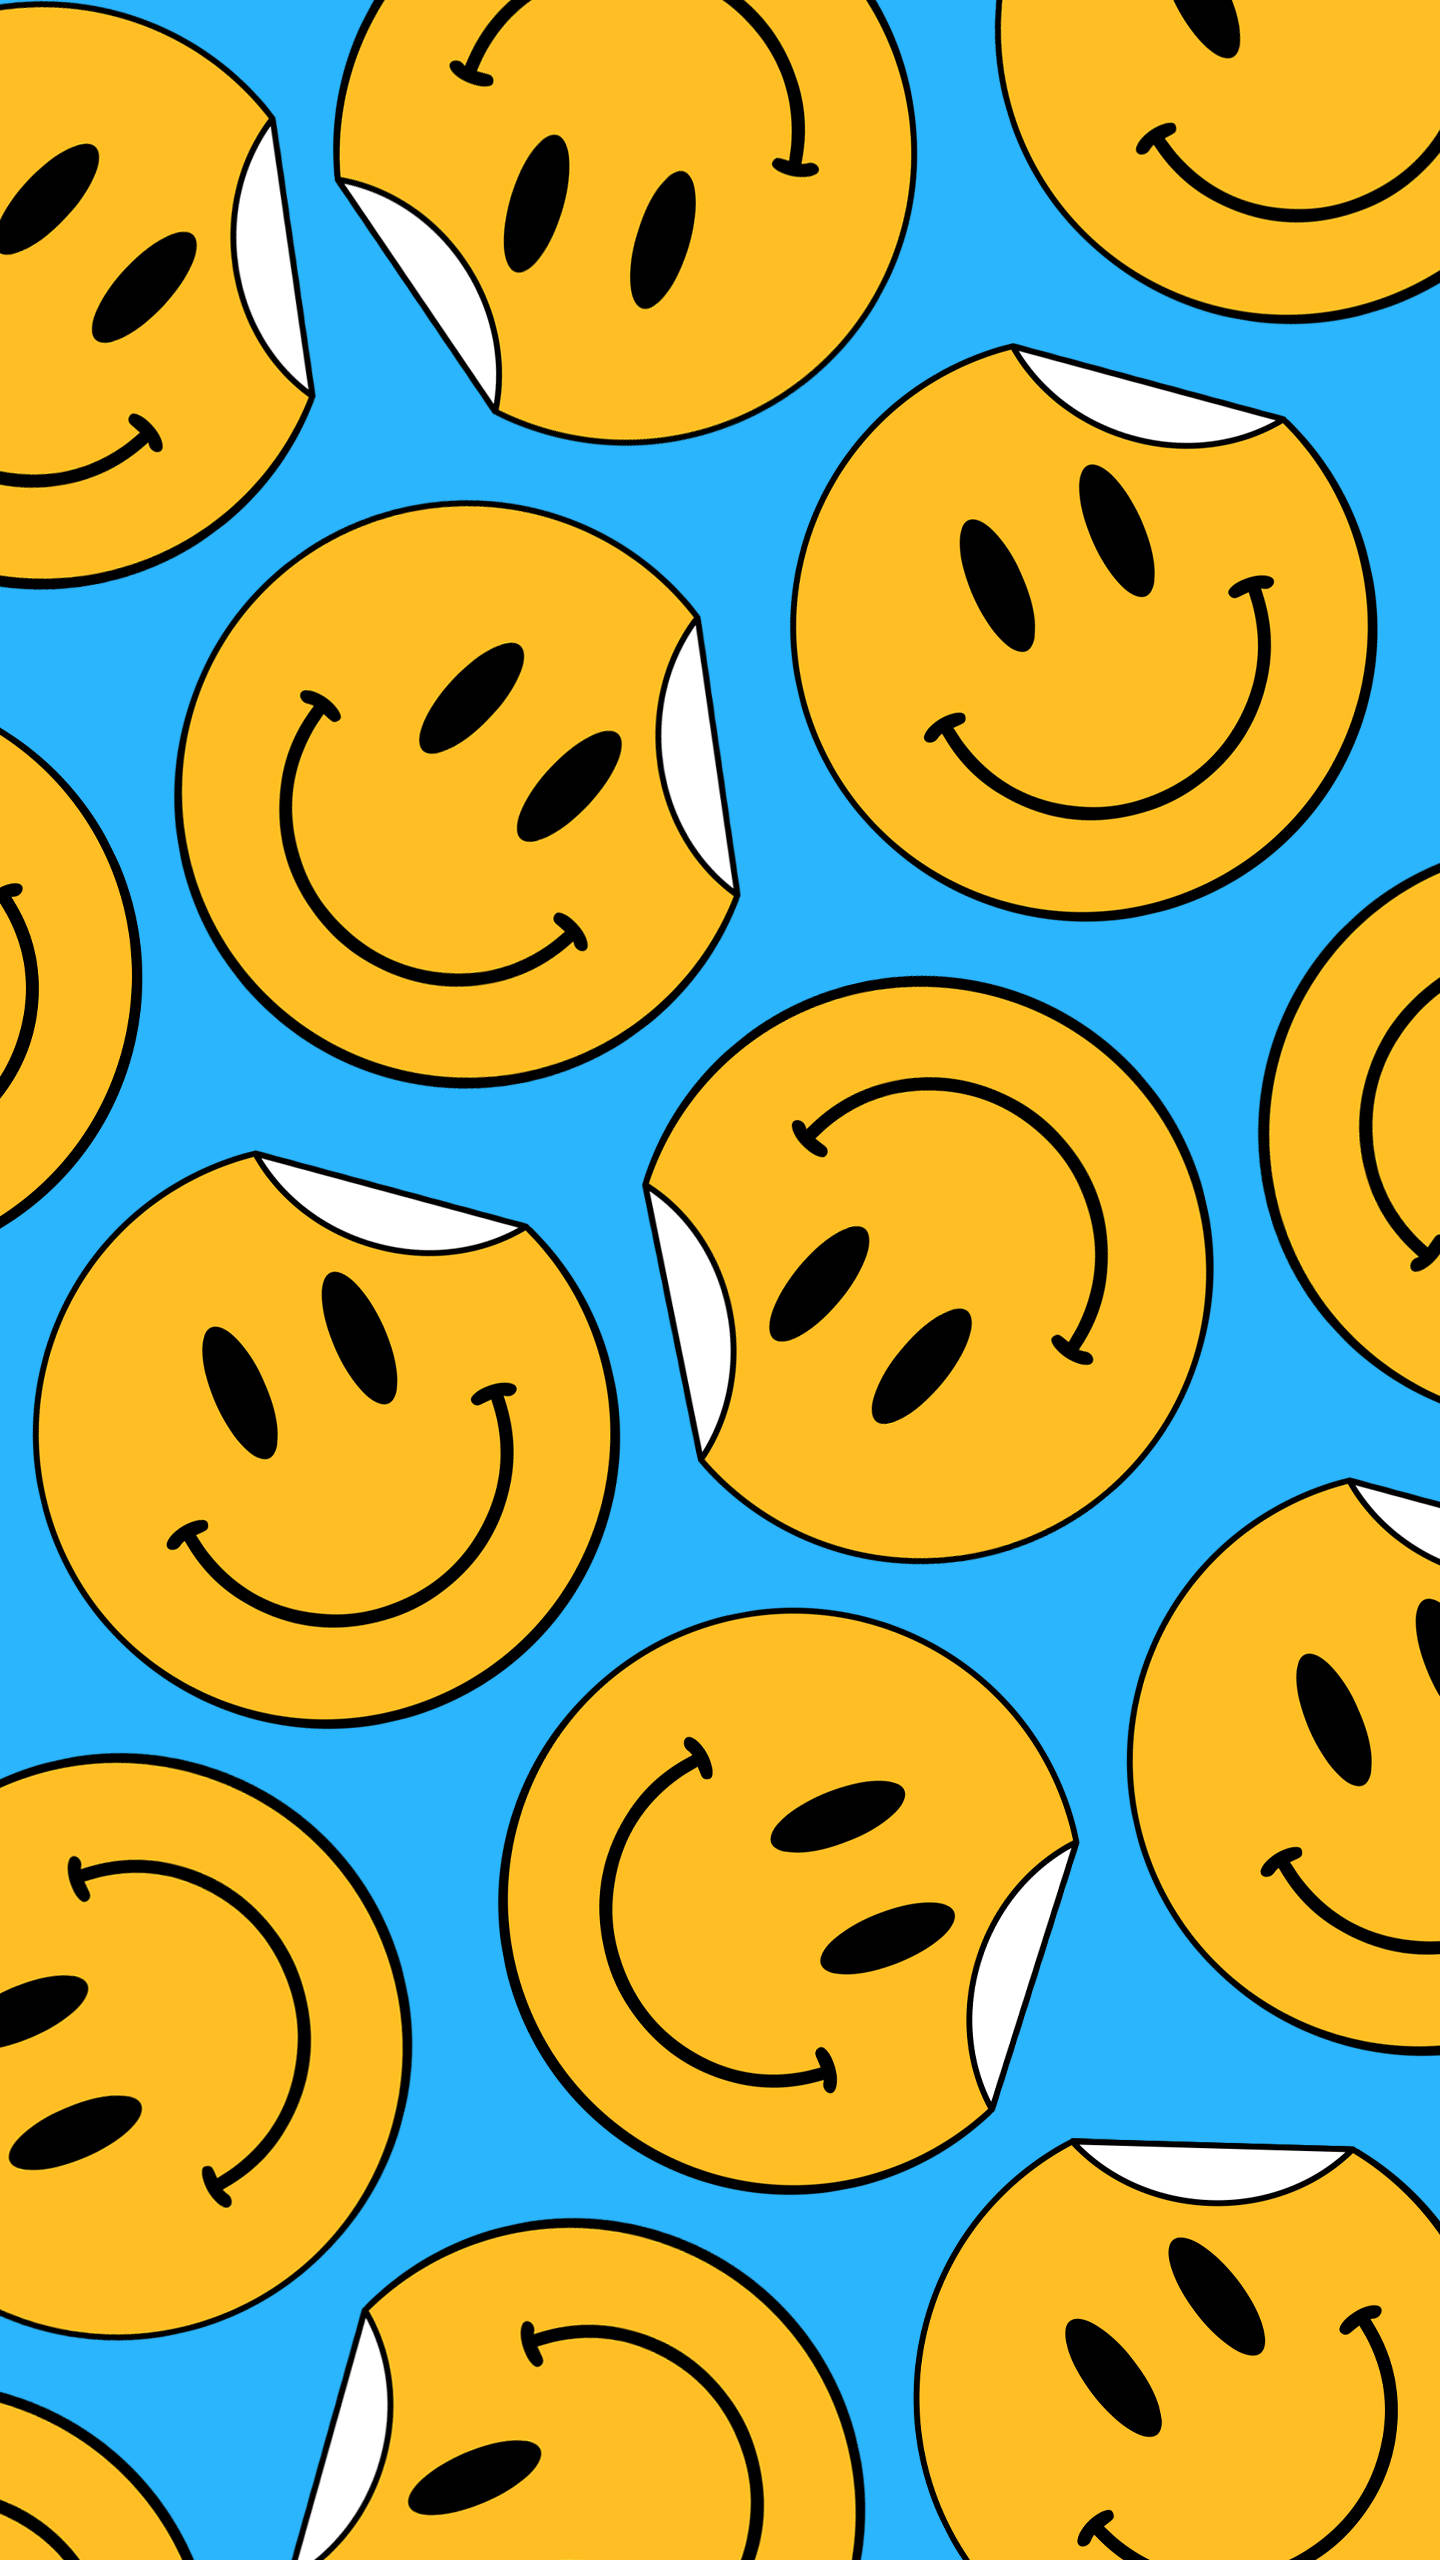 80s Retro Vintage Smiling Face Stickers Wallpaper